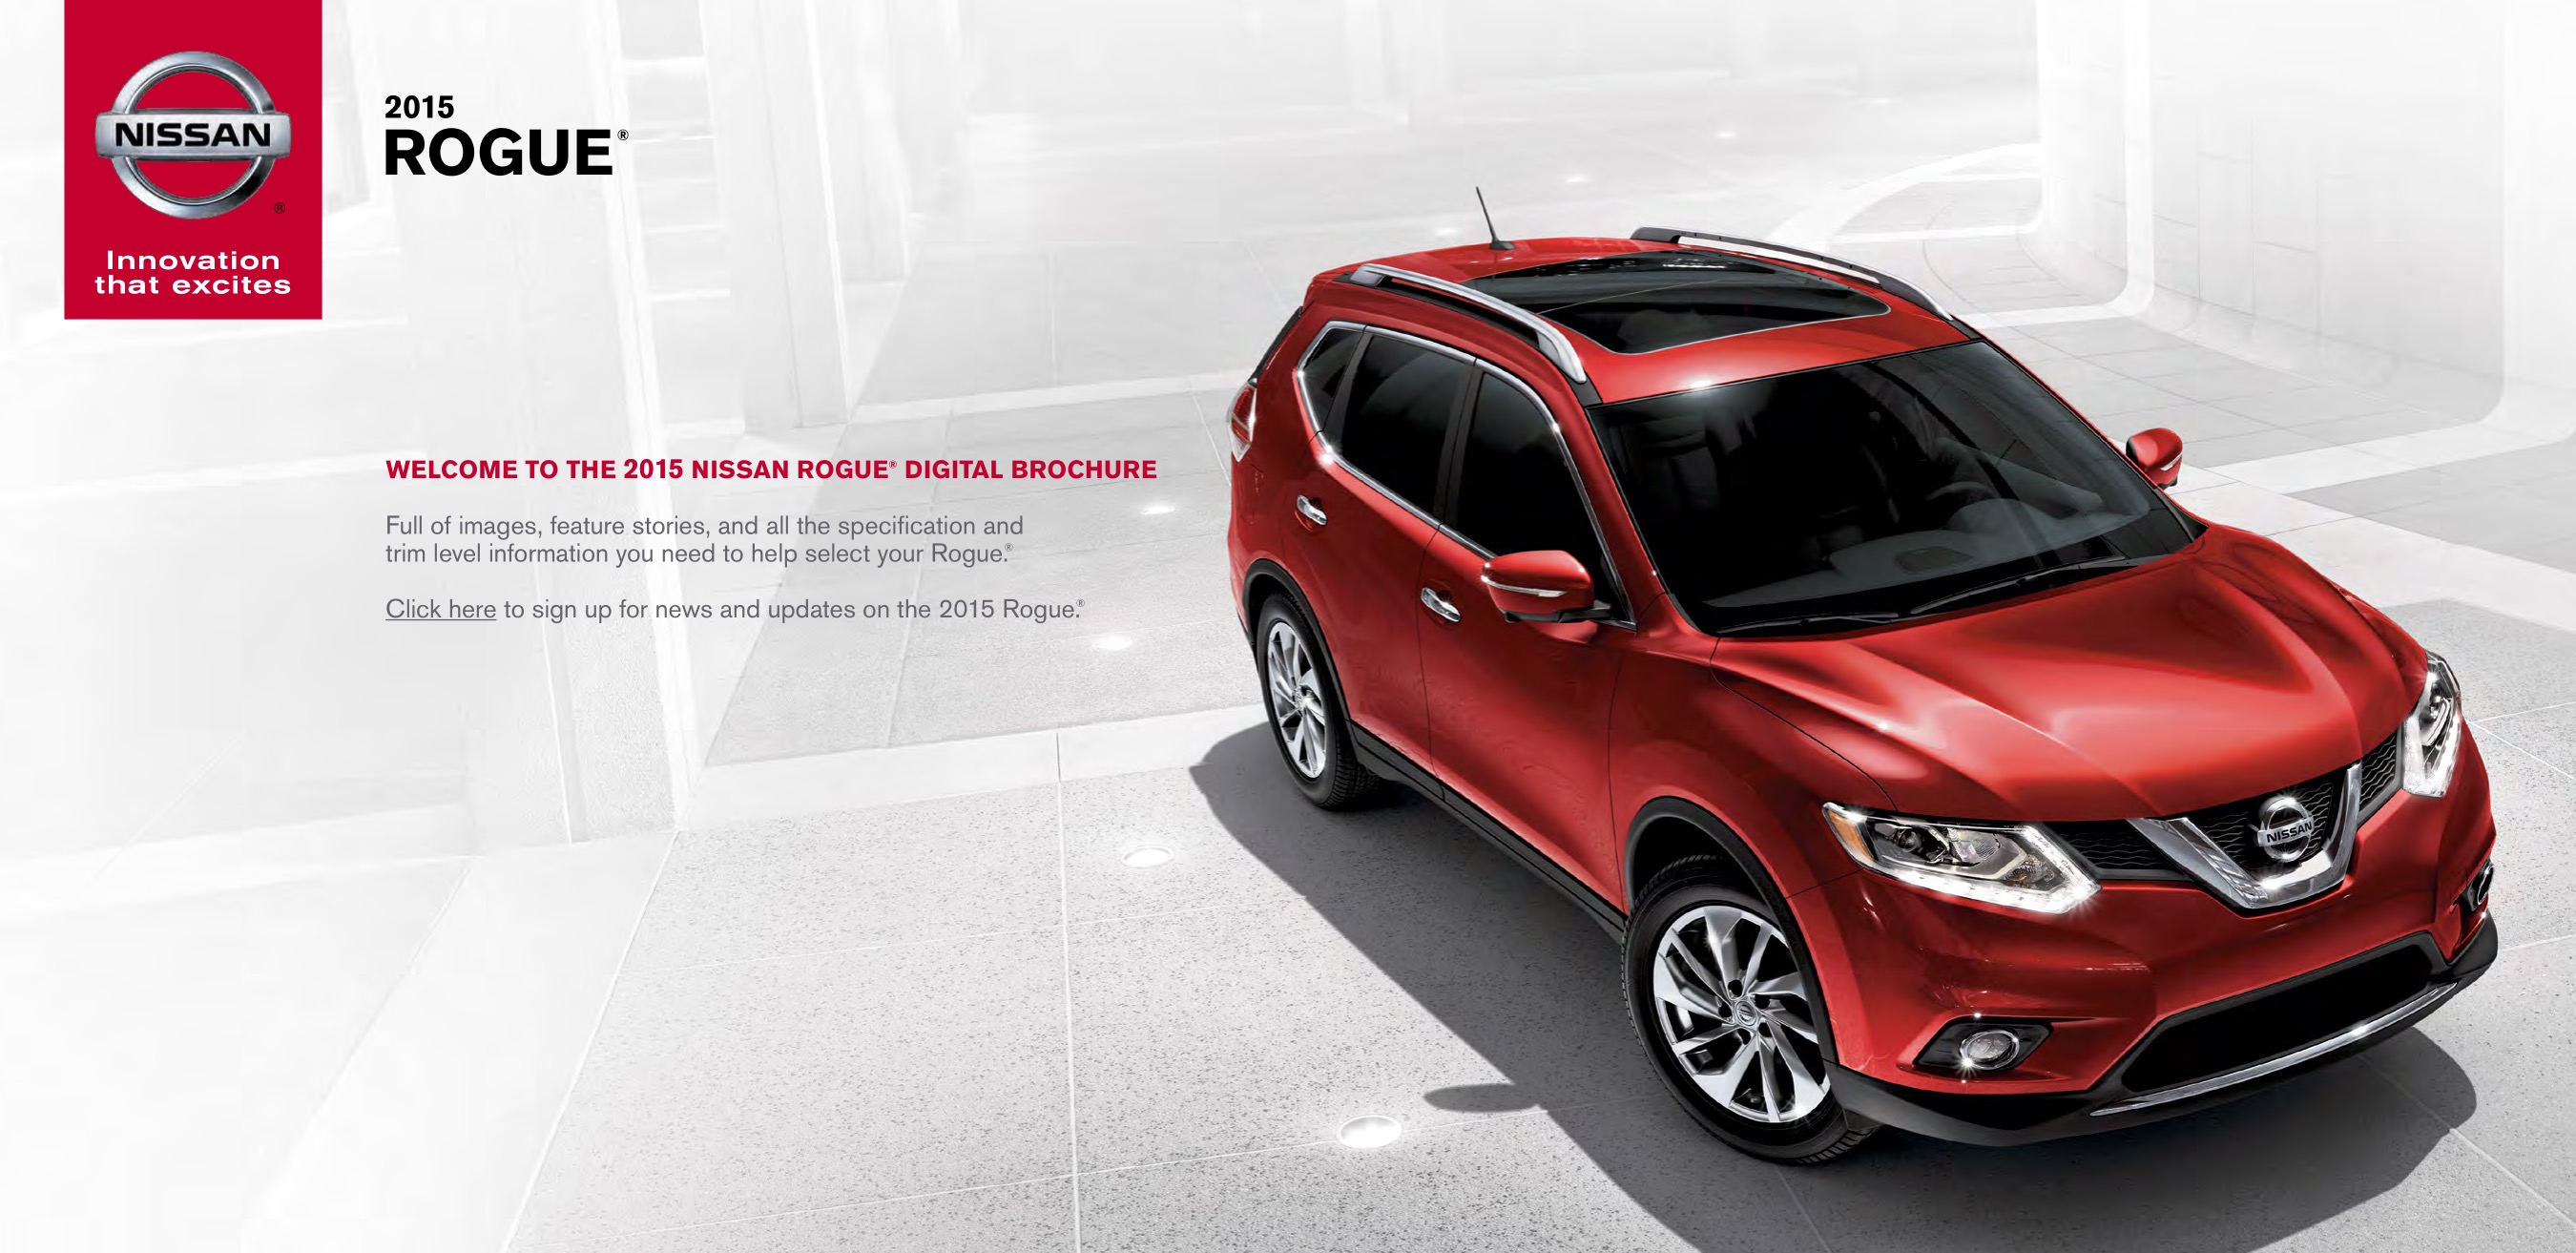 2015 Nissan Rogue Brochure Page 12